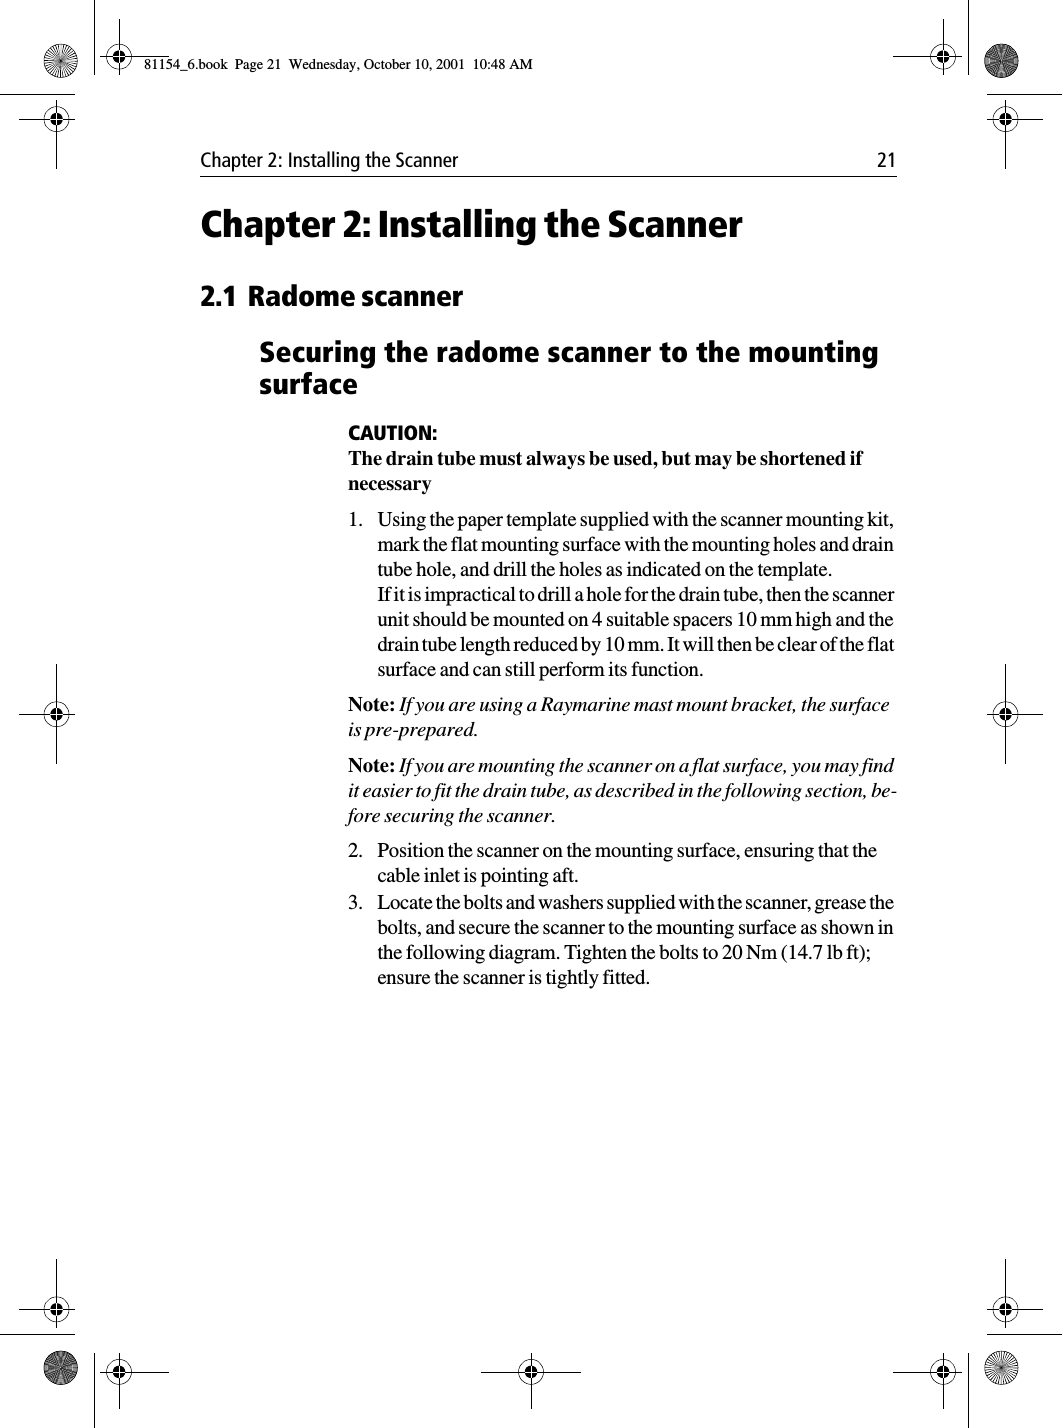 Chapter 2: Installing the Scanner 21Chapter 2: Installing the Scanner2.1 Radome scannerSecuring the radome scanner to the mounting surfaceCAUTION:The drain tube must always be used, but may be shortened if necessary1. Using the paper template supplied with the scanner mounting kit, mark the flat mounting surface with the mounting holes and drain tube hole, and drill the holes as indicated on the template.If it is impractical to drill a hole for the drain tube, then the scanner unit should be mounted on 4 suitable spacers 10 mm high and the drain tube length reduced by 10 mm. It will then be clear of the flat surface and can still perform its function. Note: If you are using a Raymarine mast mount bracket, the surface is pre-prepared.Note: If you are mounting the scanner on a flat surface, you may find it easier to fit the drain tube, as described in the following section, be-fore securing the scanner.2. Position the scanner on the mounting surface, ensuring that the cable inlet is pointing aft.3. Locate the bolts and washers supplied with the scanner, grease the bolts, and secure the scanner to the mounting surface as shown in the following diagram. Tighten the bolts to 20 Nm (14.7 lb ft); ensure the scanner is tightly fitted. 81154_6.book  Page 21  Wednesday, October 10, 2001  10:48 AM